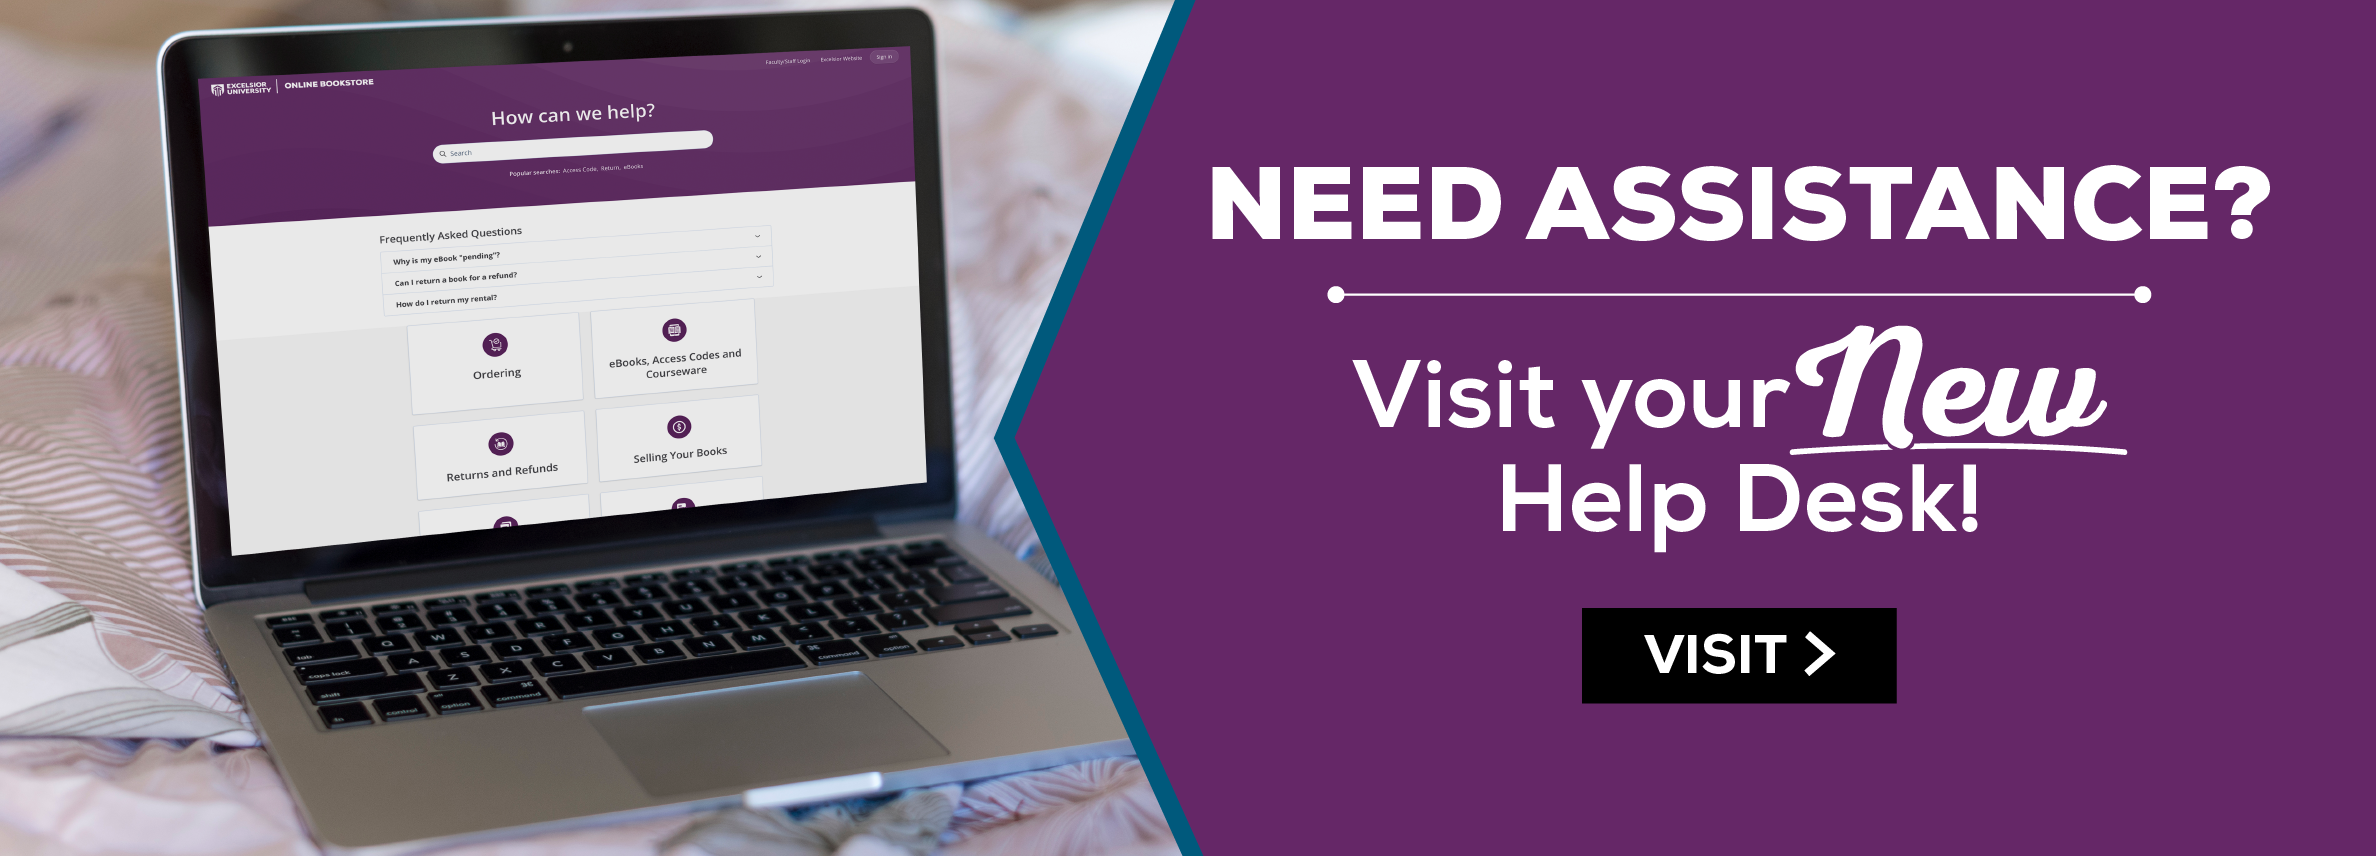 Need assistance? Visit your NEW Help Desk! Visit Now. (new tab)